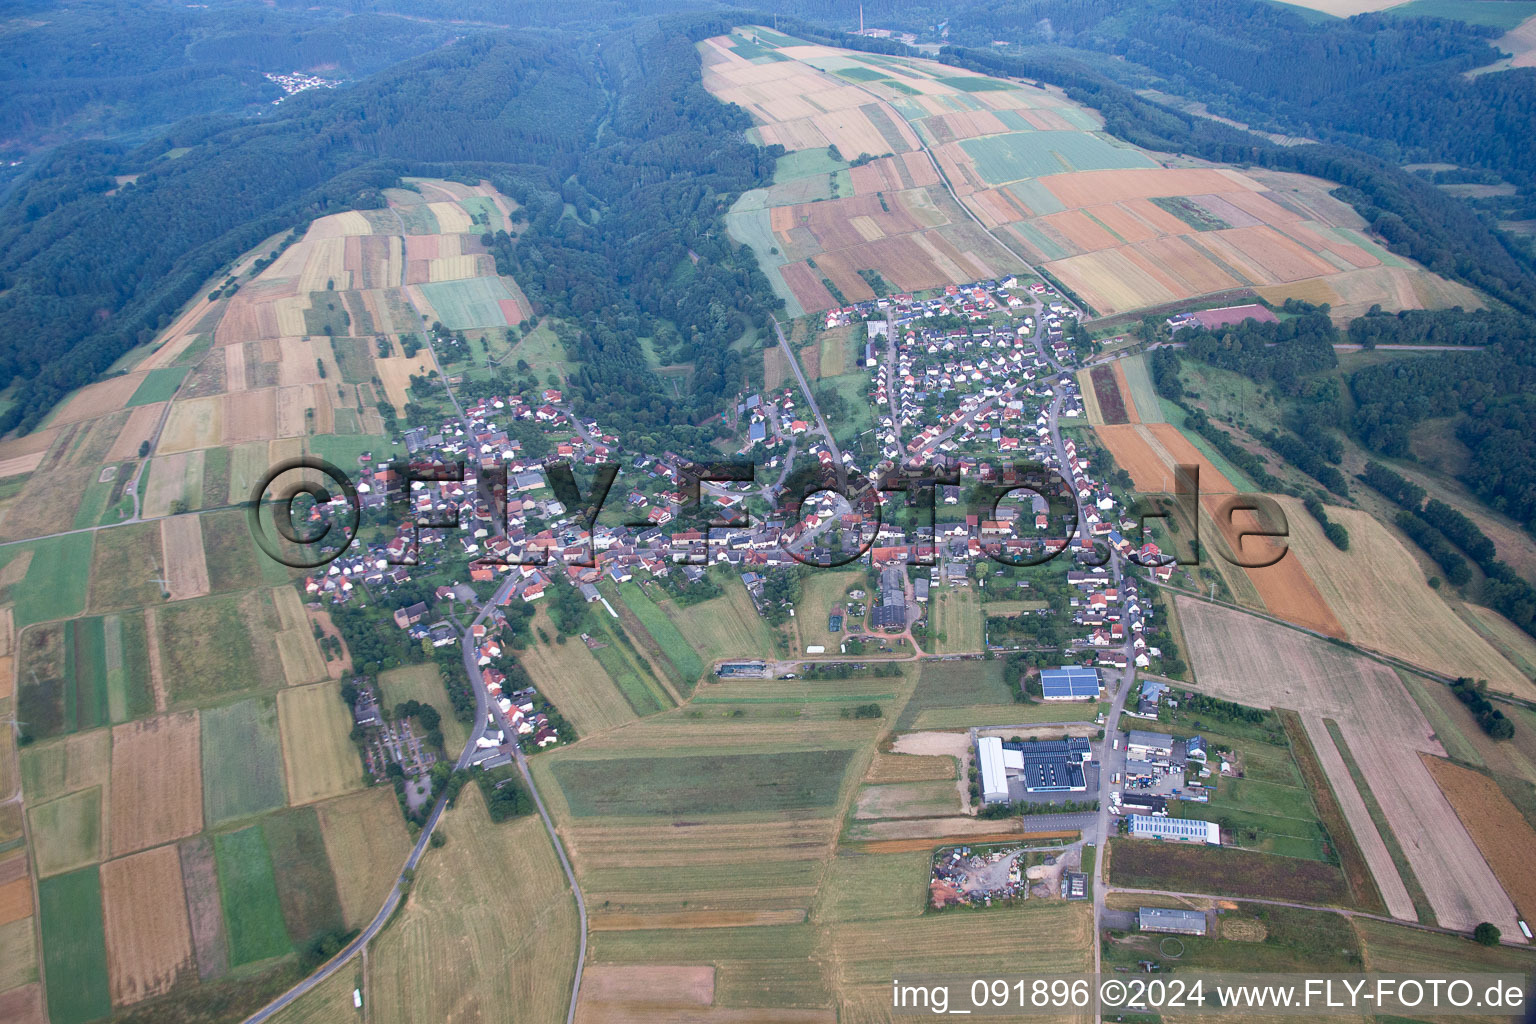 Aerial photograpy of Village - view on the edge of agricultural fields and farmland in Donsieders in the state Rhineland-Palatinate